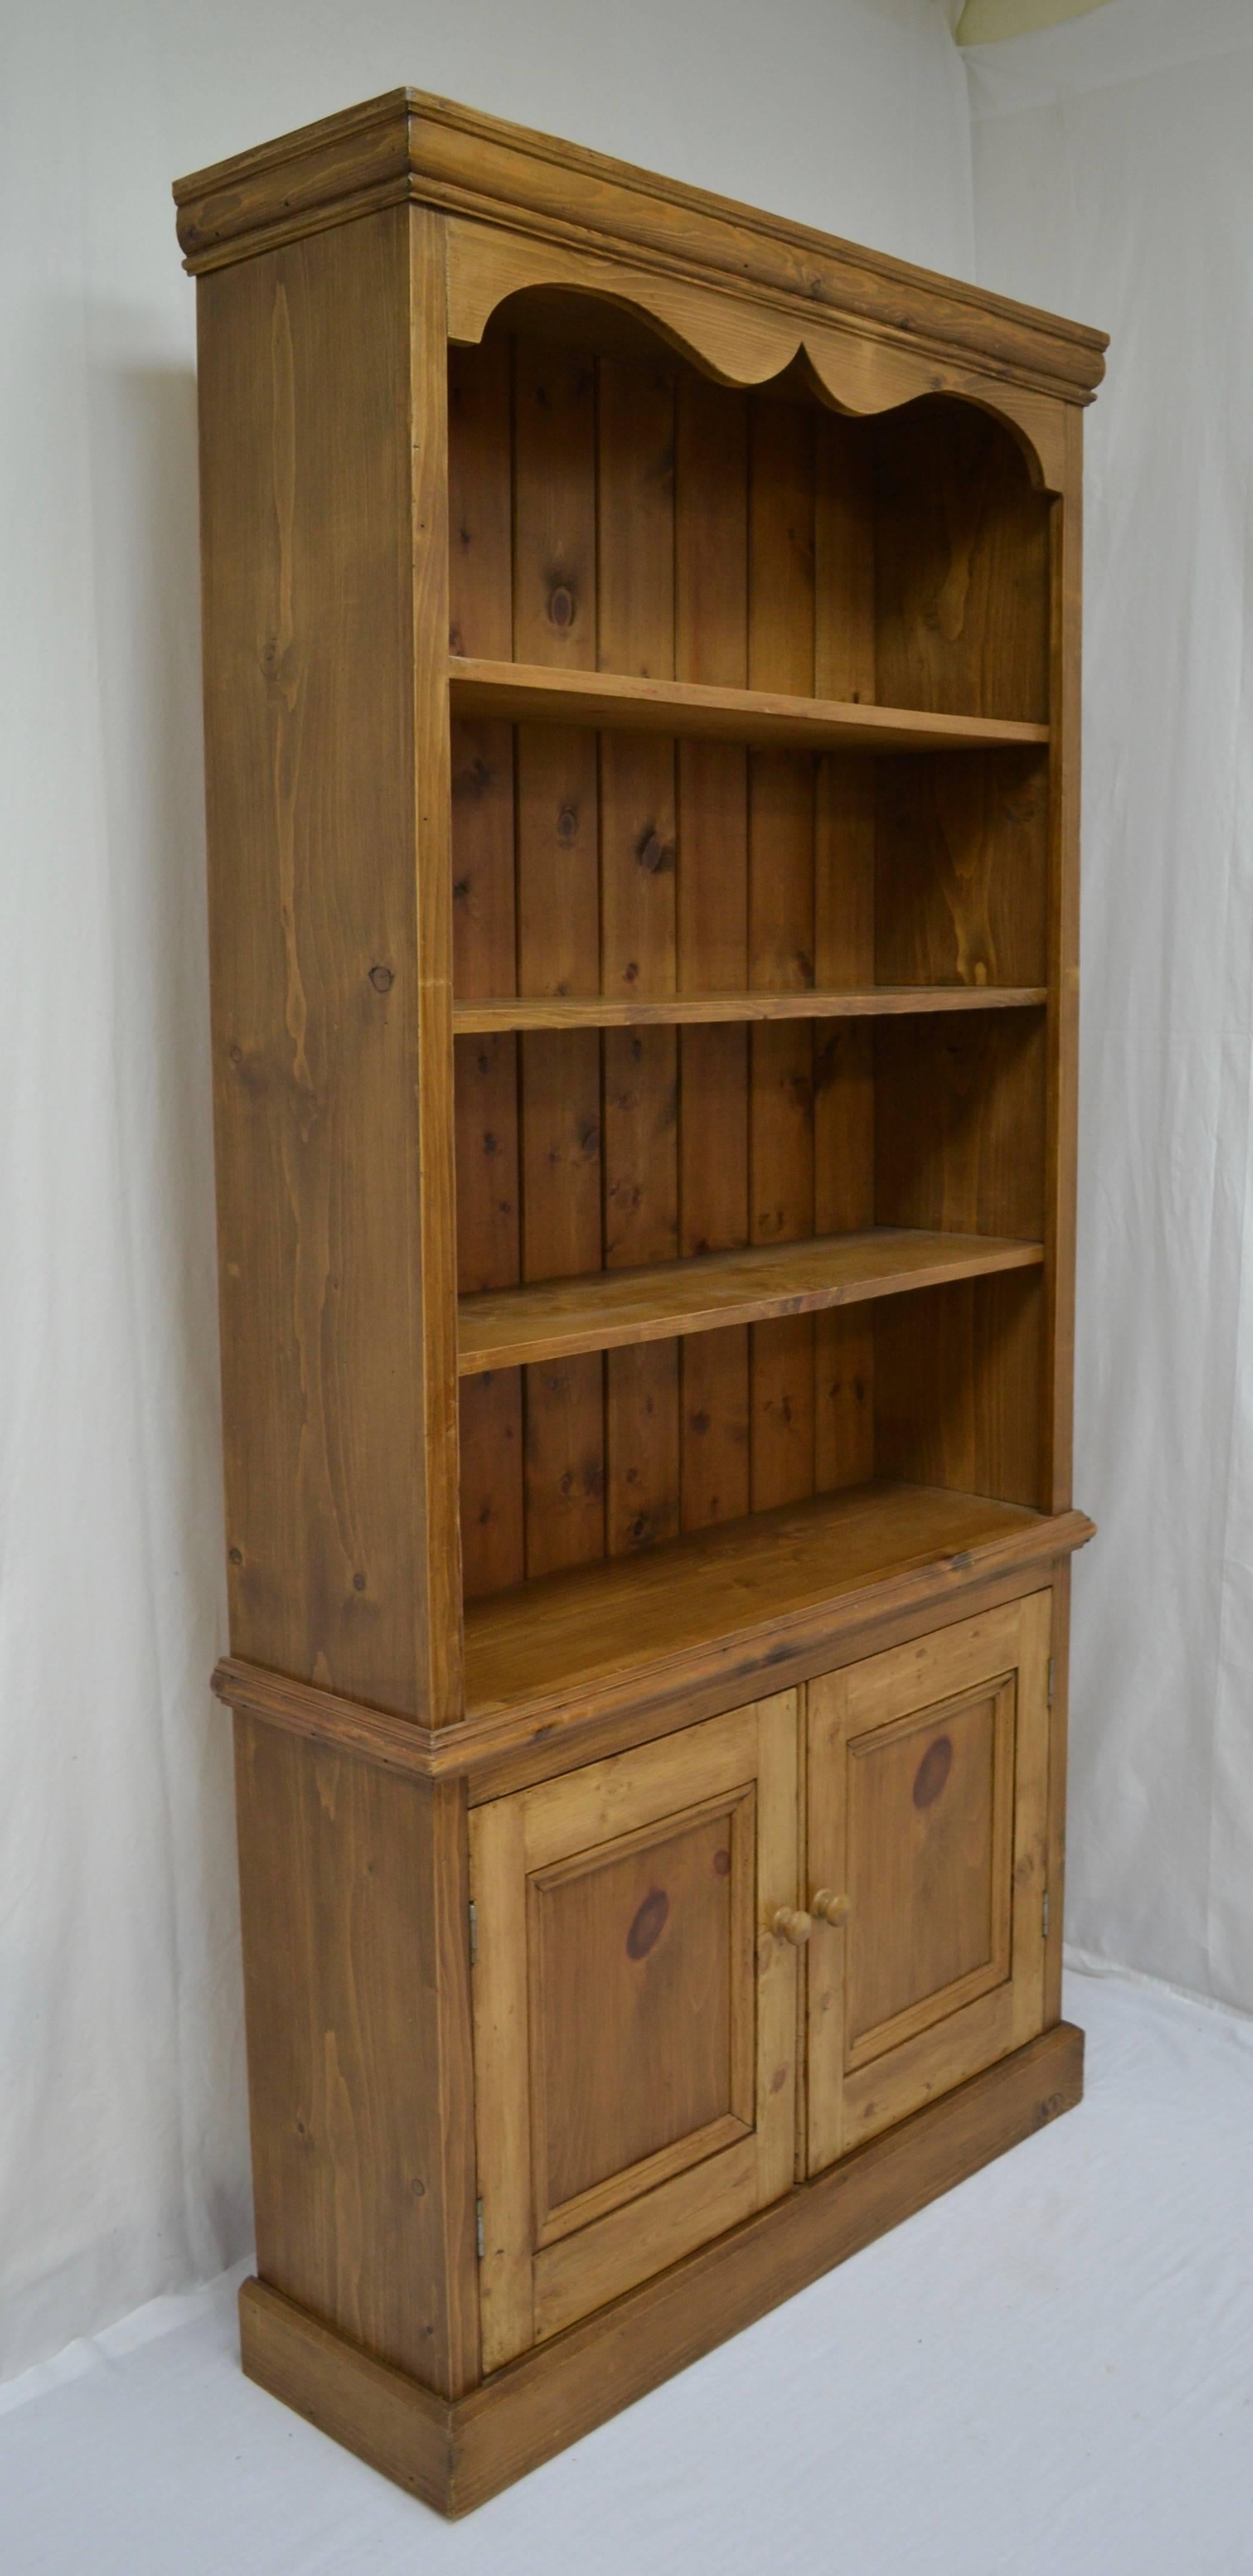 Antique pine bookcases can be hard to find so a workshop in England has fashioned this small and versatile piece from reclaimed pine, using traditional construction techniques This otherwise plain piece has a scalloped frieze beneath its crown